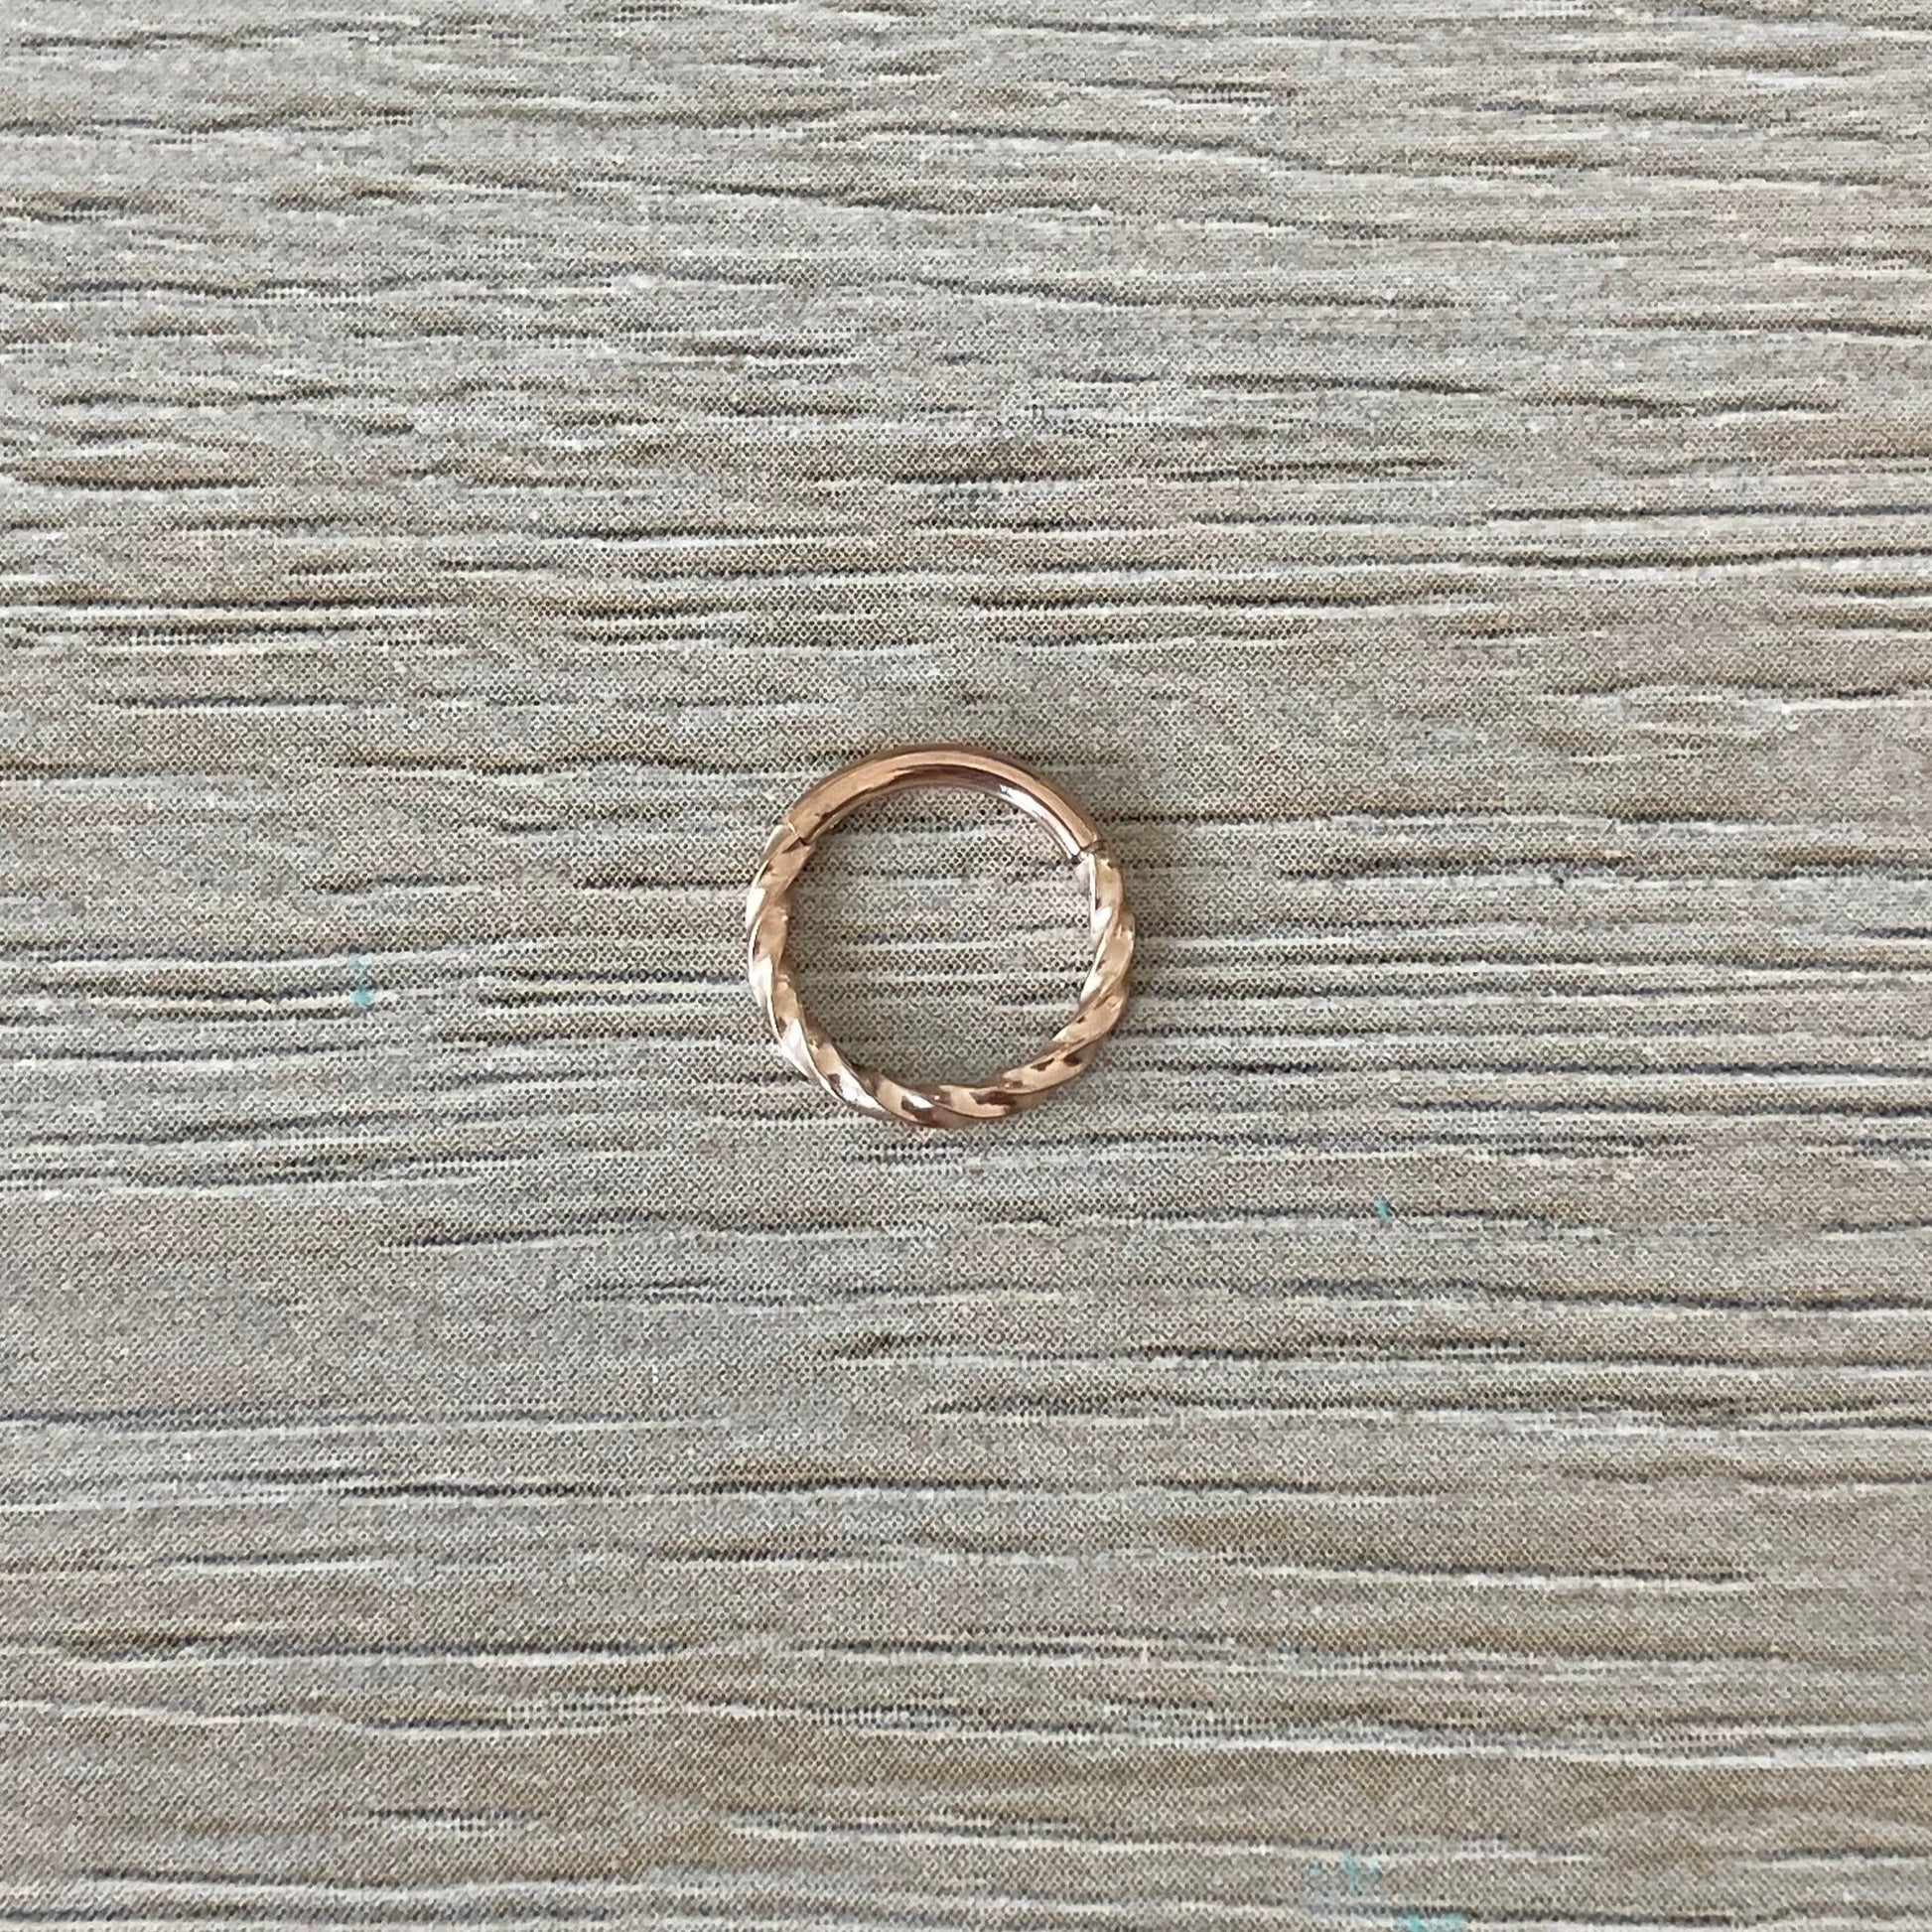 Rose Gold Twisted Septum Piercing (16G | 8mm | Surgical Steel | Rainbow, Black, Silver, Rose Gold, or Gold)